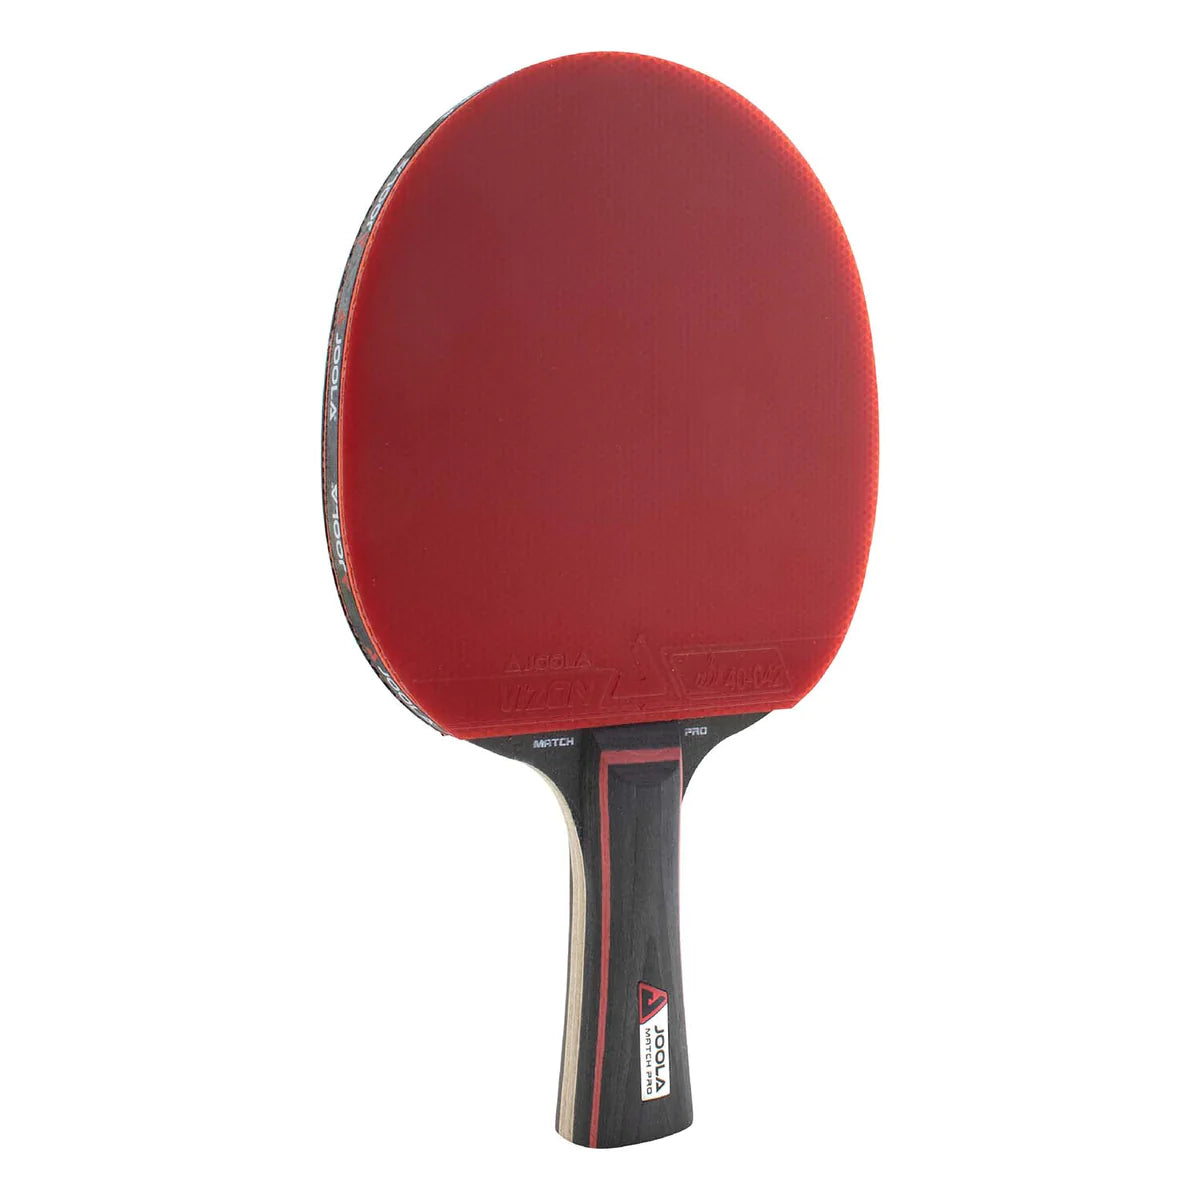 JOOLA Match Pro ITTF Approved Competition Table Tennis Bat